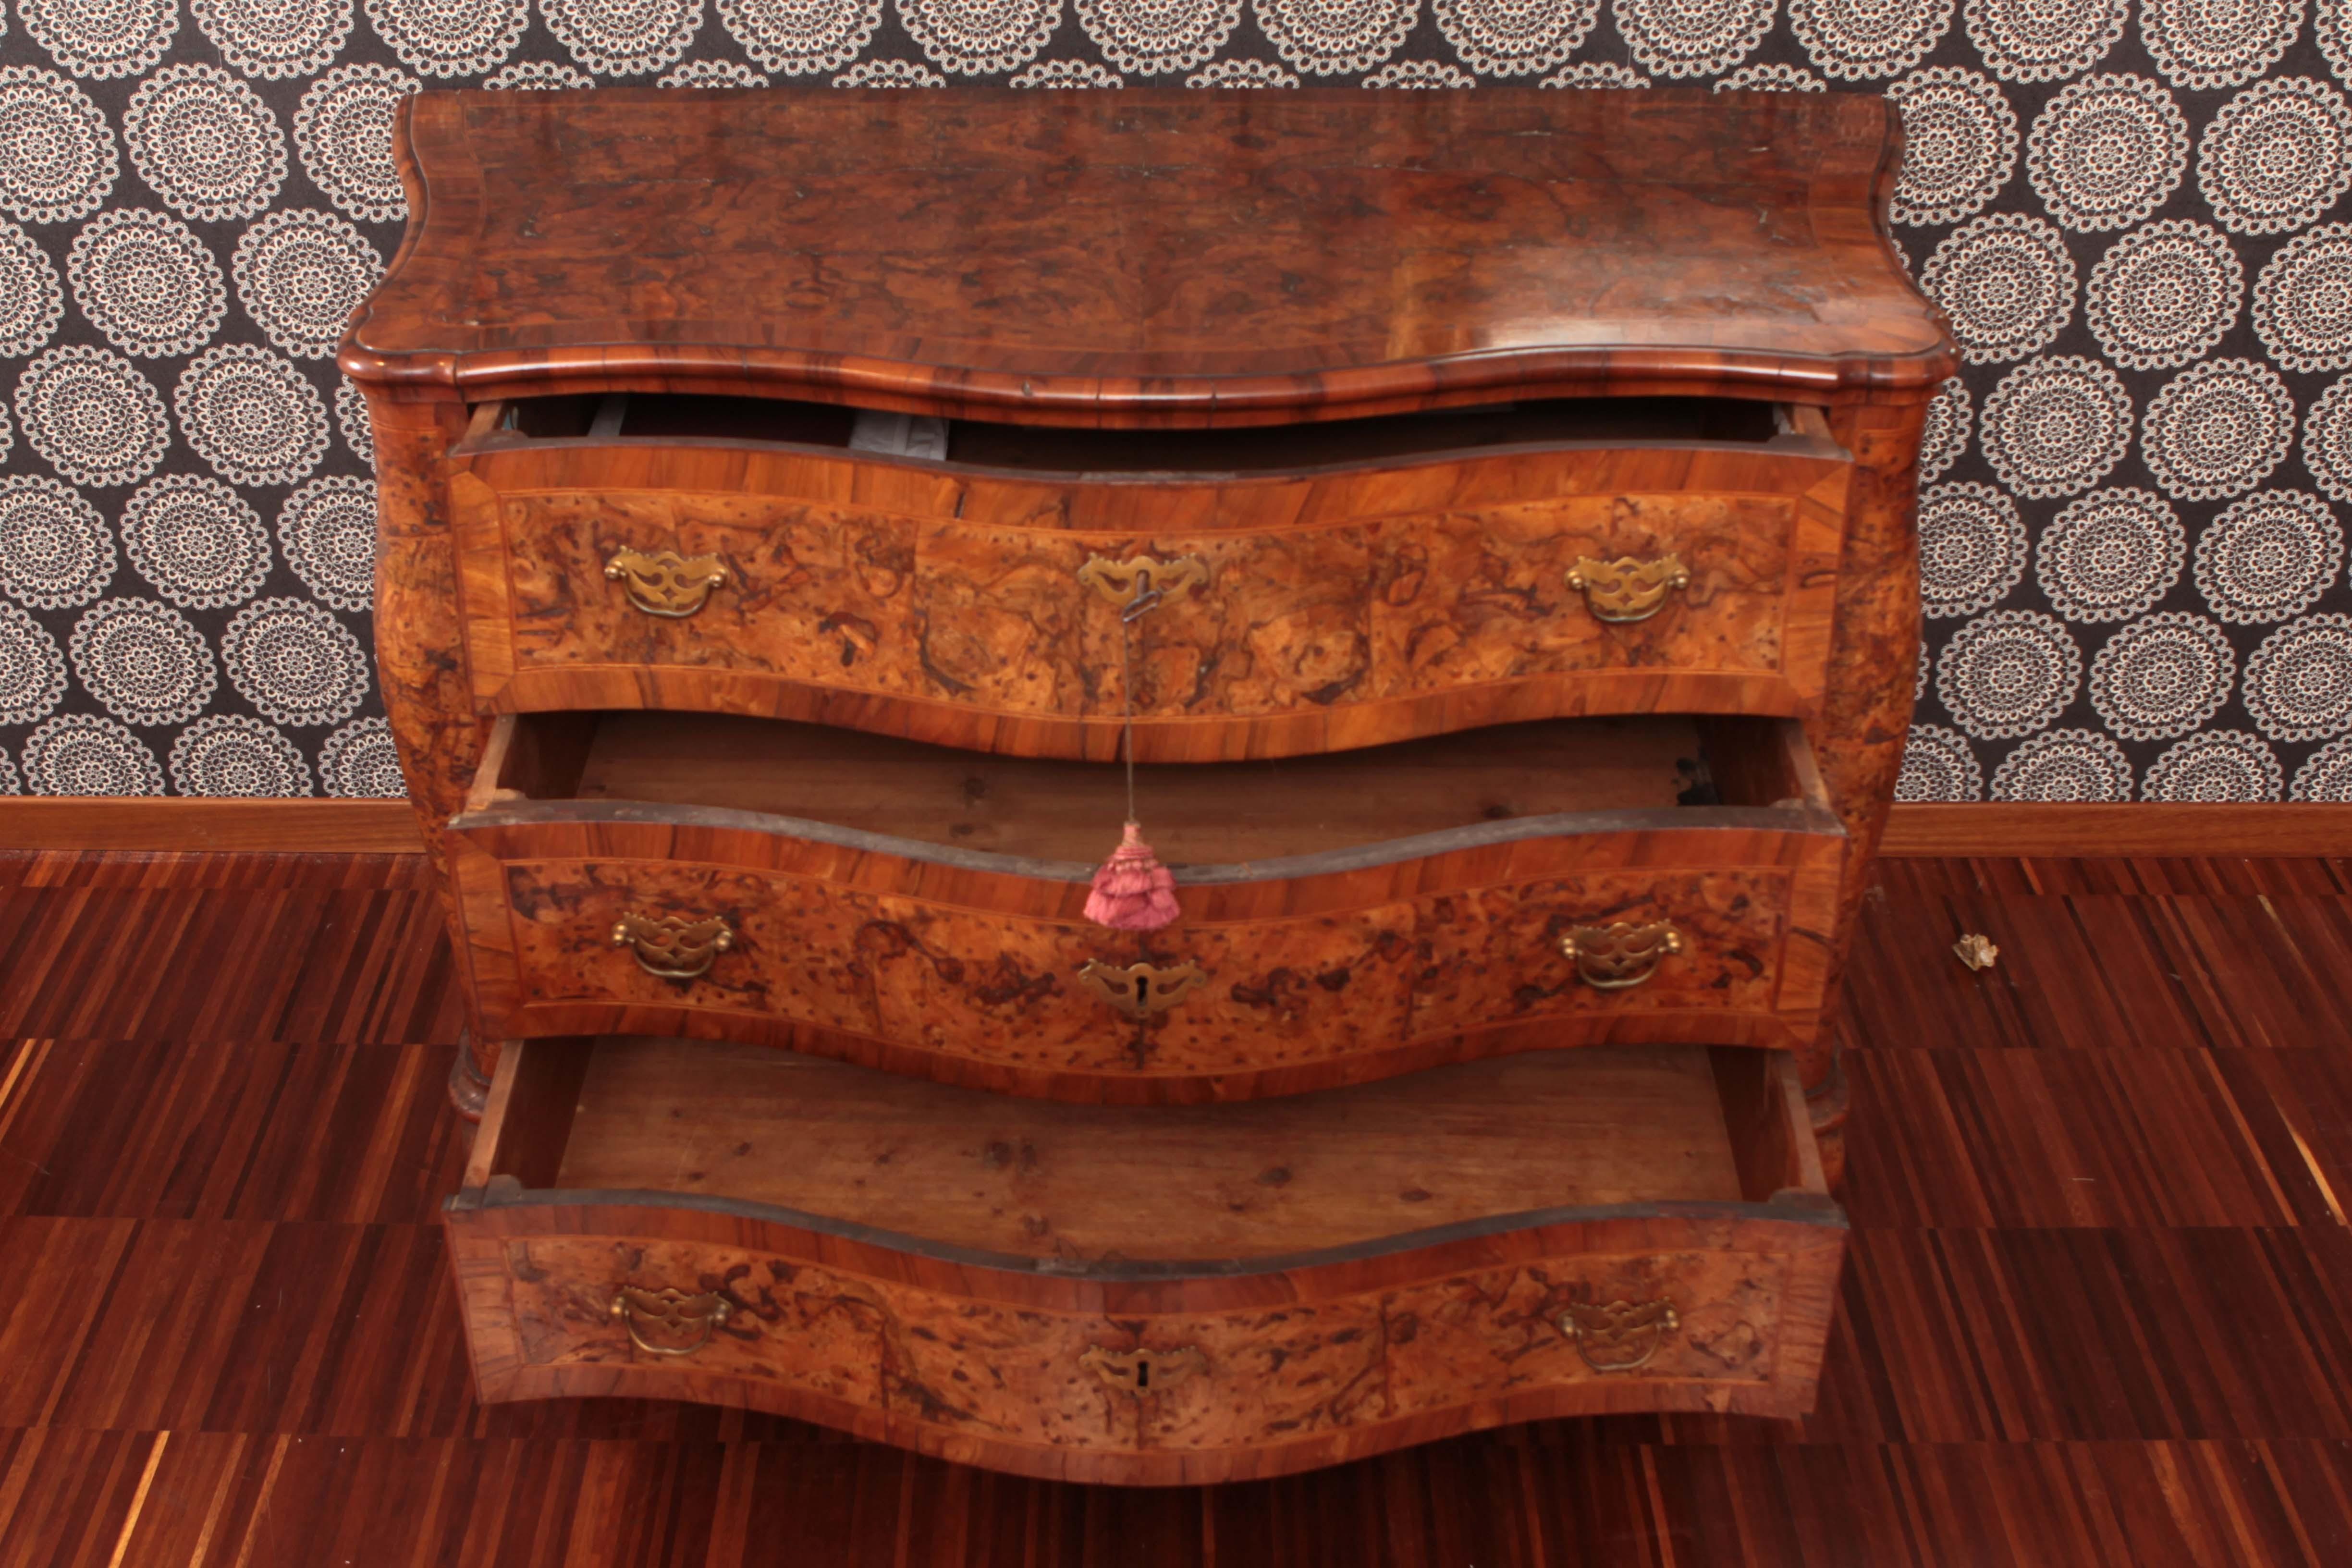 Precious chest in olive briar, rounded and enriched with light carvings. Divided into three drawers, it stands on wavy feet.
Origin: Northern Italy, Venice
Period: first half 1700
Dimensions: 146 x 71 x 97.5 cm.
 